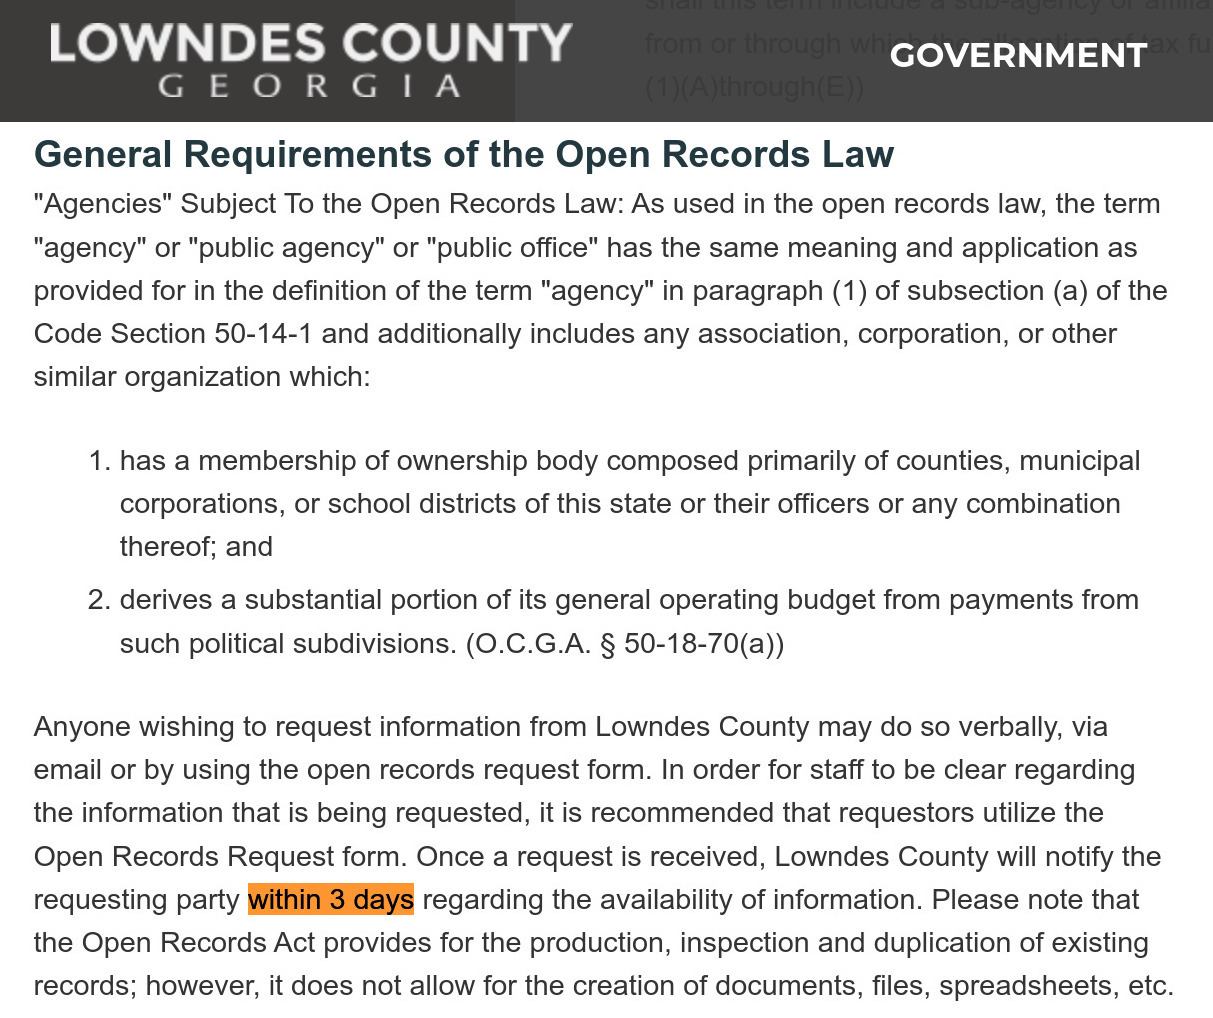 [Open Records Law --lowndescounty.com]